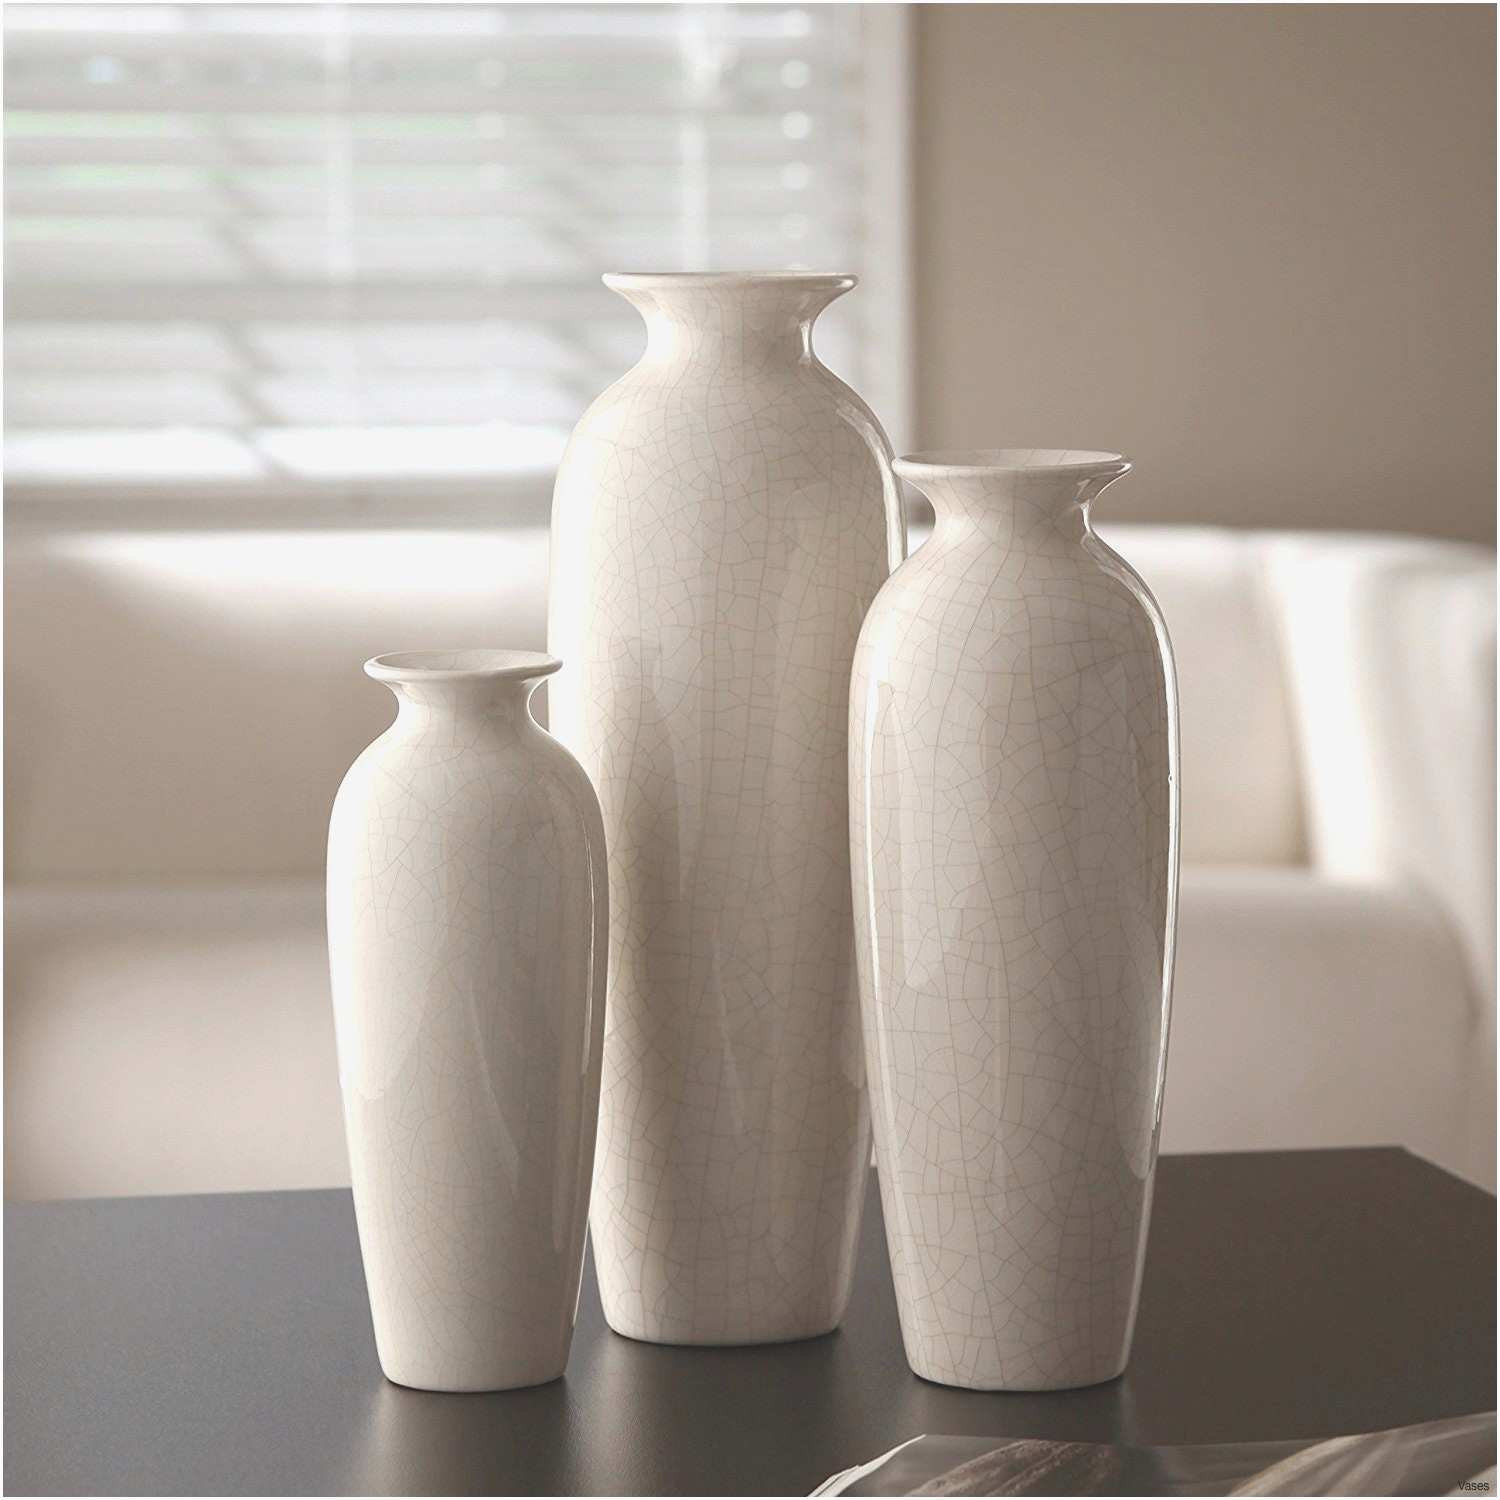 tuscan vases home decor of vases set of 3 images ceramic tuscan vase set of 3 home interior regarding vases set of 3 stock beautiful gift ideas for wedding of vases set of 3 images